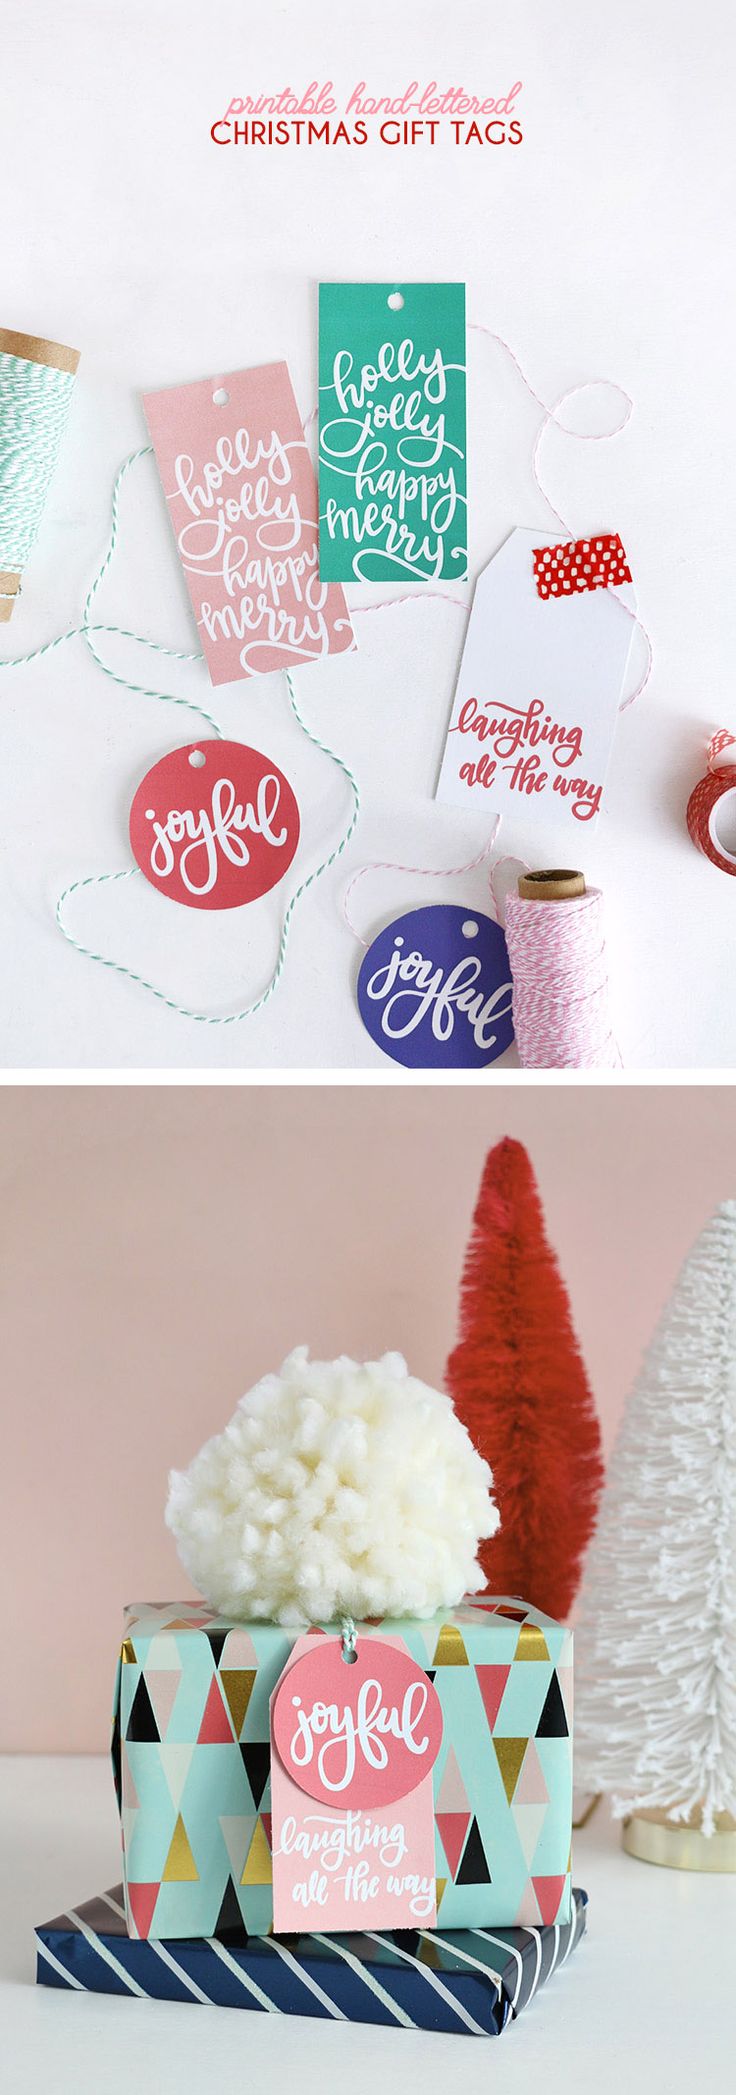 hand lettered free printable christmas gift tags - these are so cute